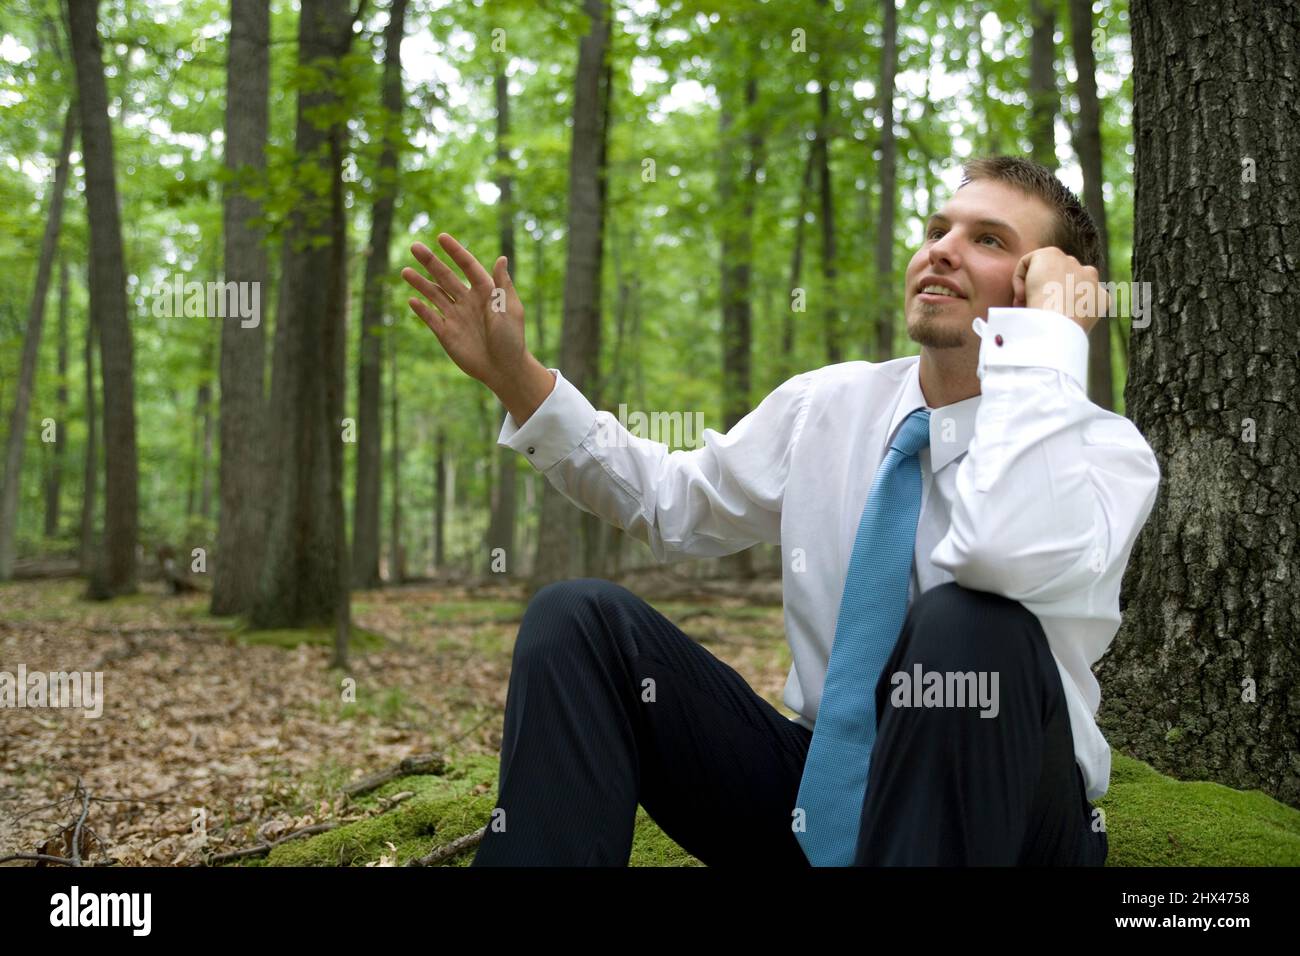 PORTRAIT OF YOUNG BUSINESSMAN WITH TELEPHONE SITTING IN TEMPERATE MIXED NORTHERN FOREST Stock Photo